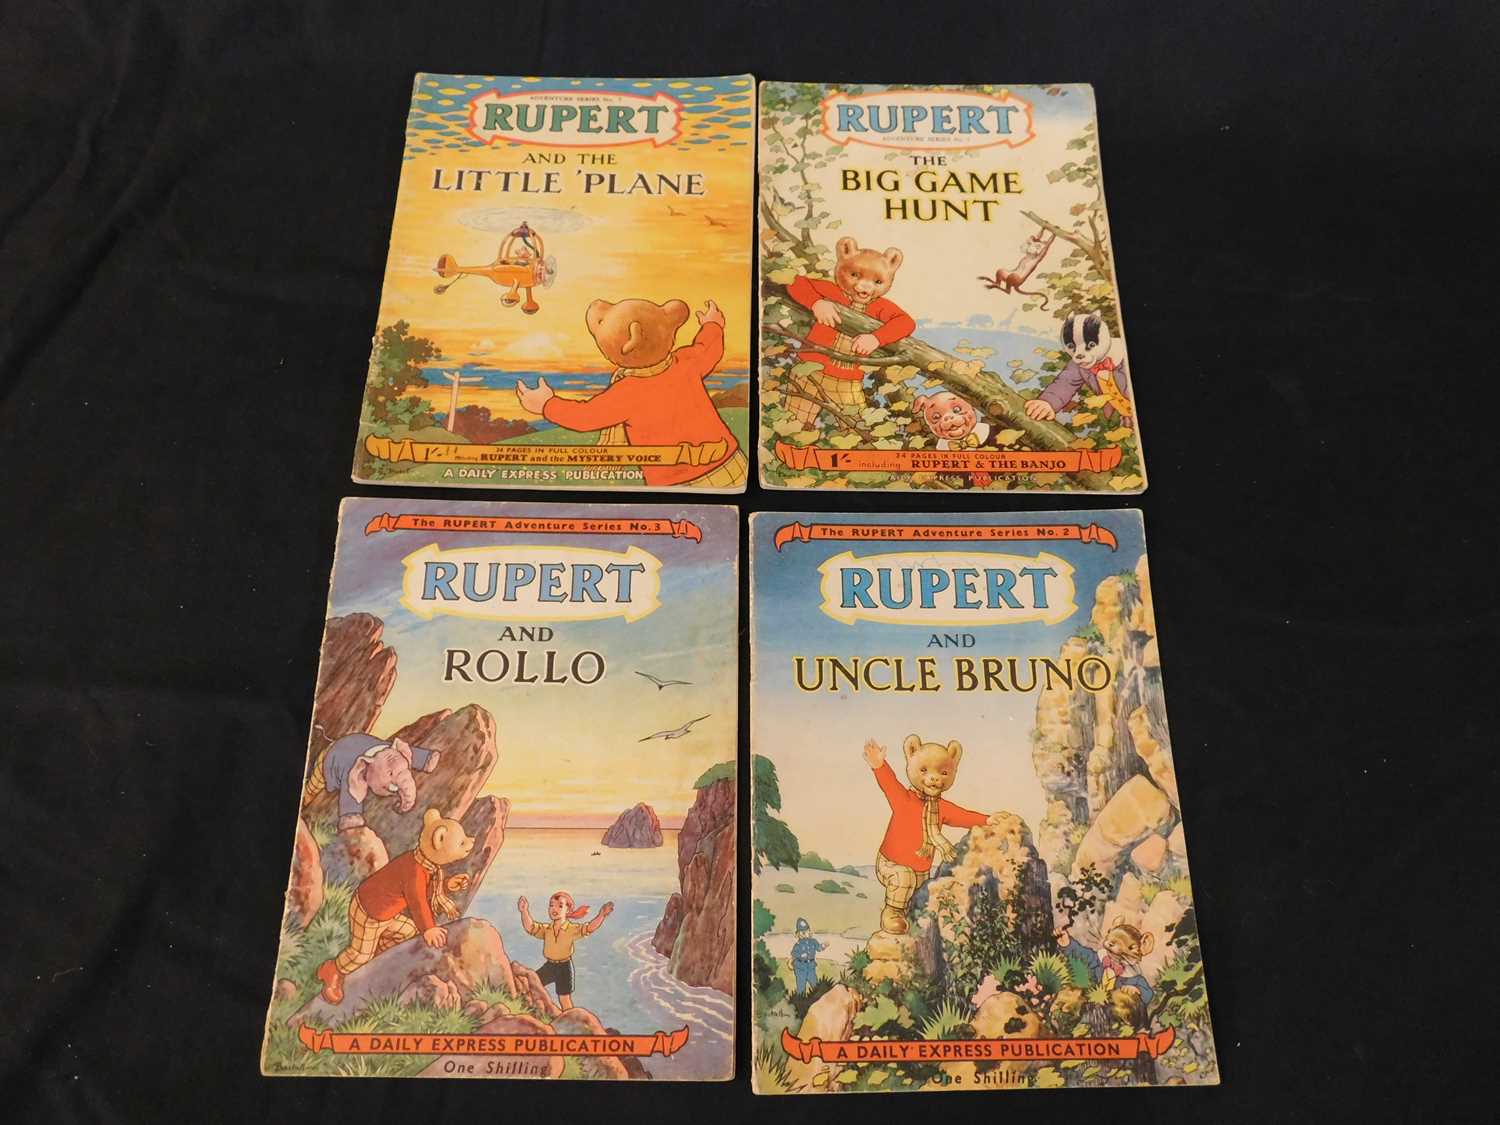 MORE ADVENTURES OF RUPERT, [1947] annual, price unclipped, pencil inscription on 'This book - Image 4 of 5